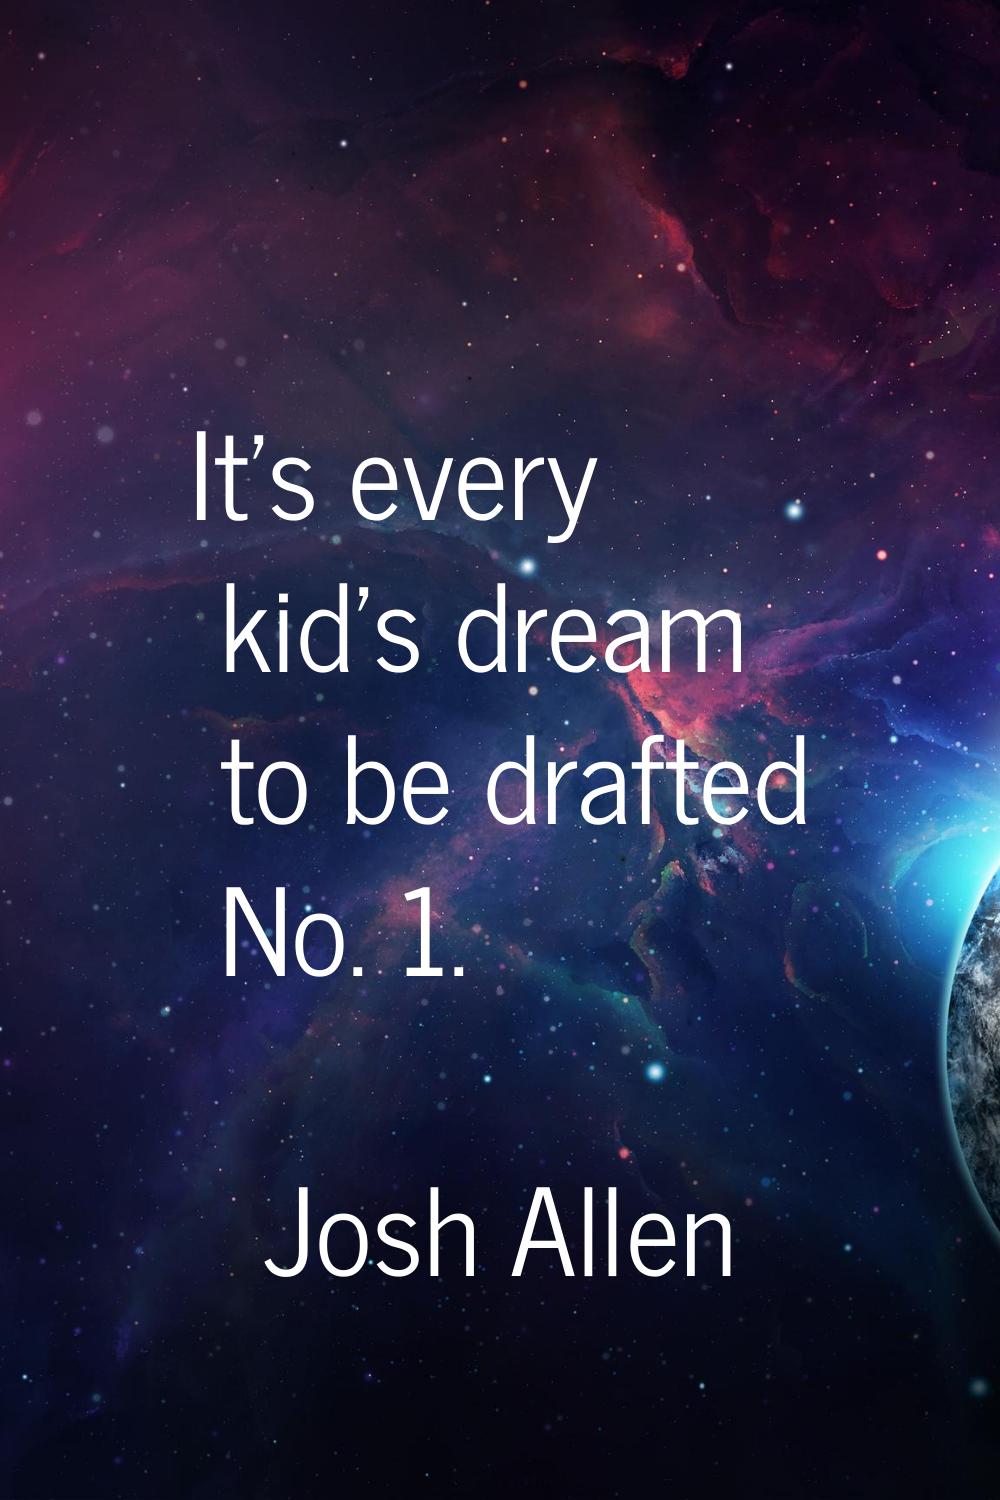 It's every kid's dream to be drafted No. 1.